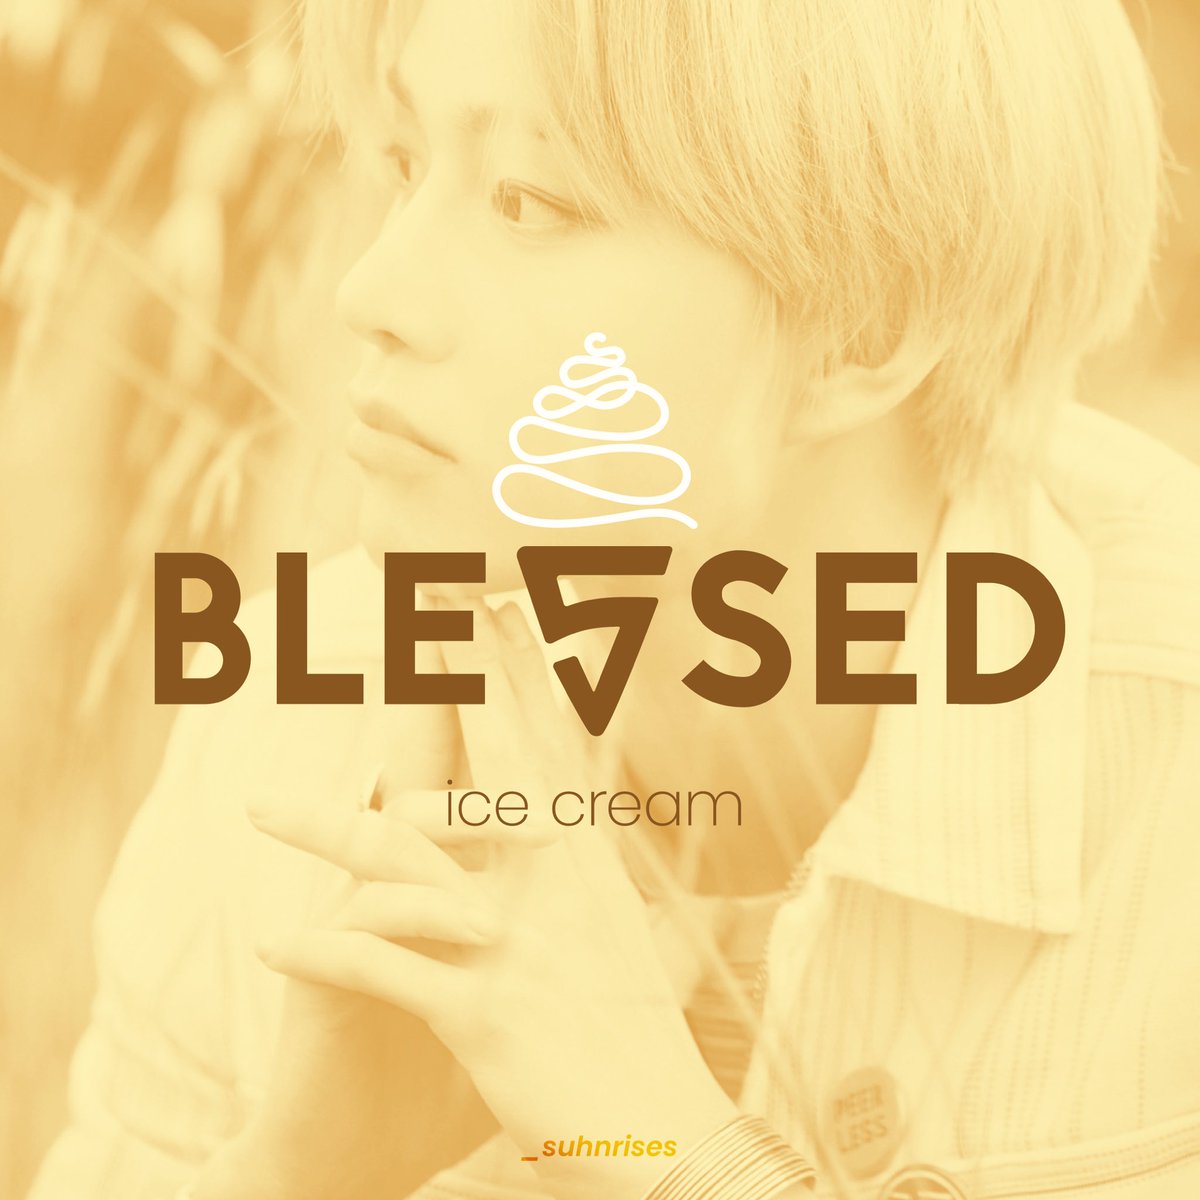 jungwoo: ble5sed ice cream- ice cream store - brand name inspired by obok (his dog’s name which means 5 blessings) - the ben & jerrys of ncity, everyone loves him, deserve